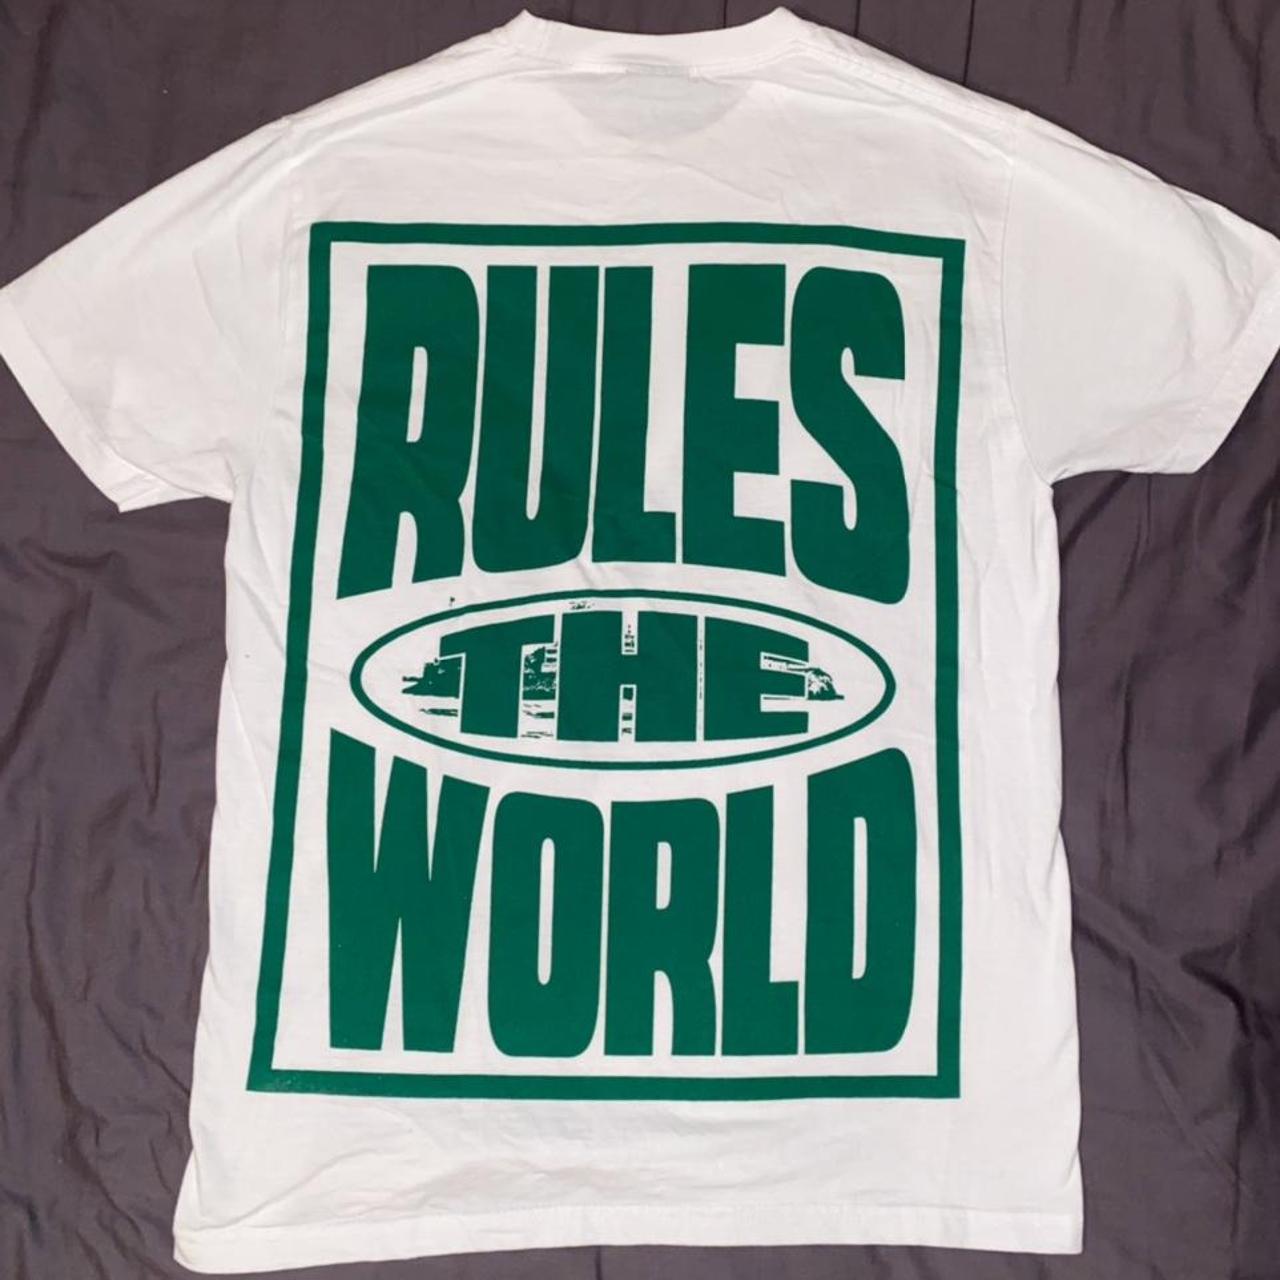 Corteiz rules the world tshirt, Size small, Send offers x